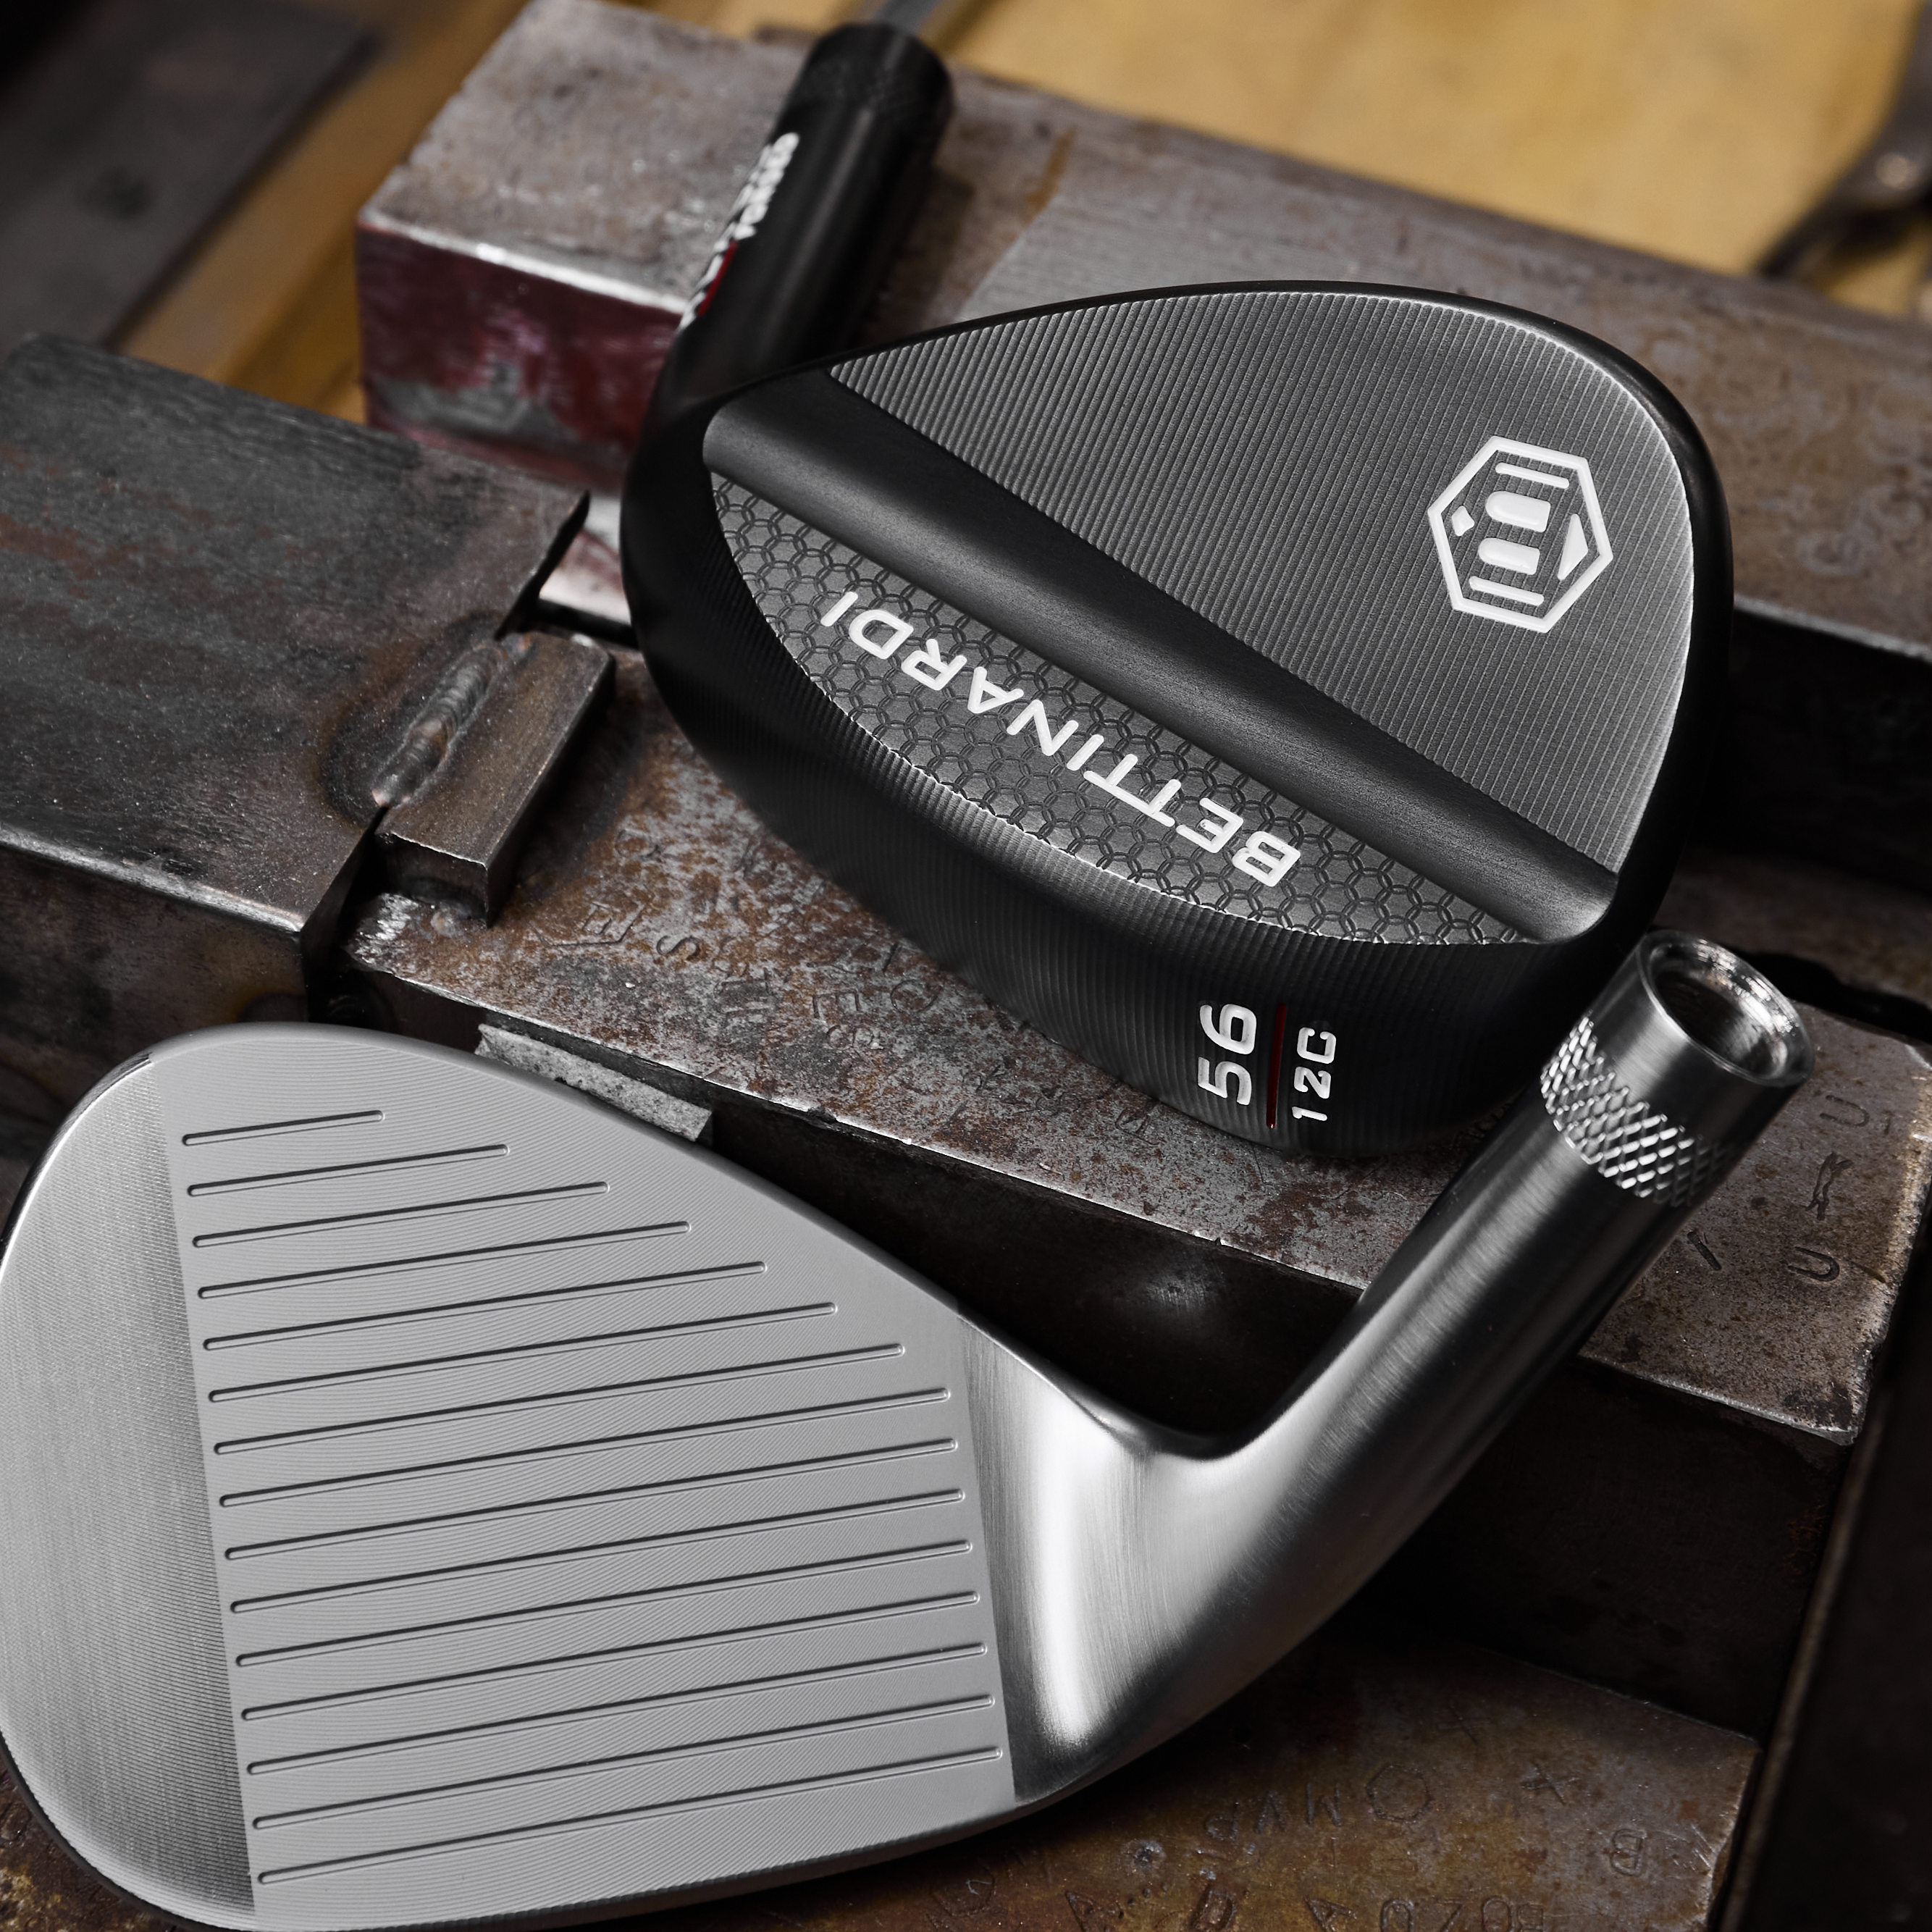 2023 Bettinardi HLX 5.0 Forged wedges: Everything you need to know